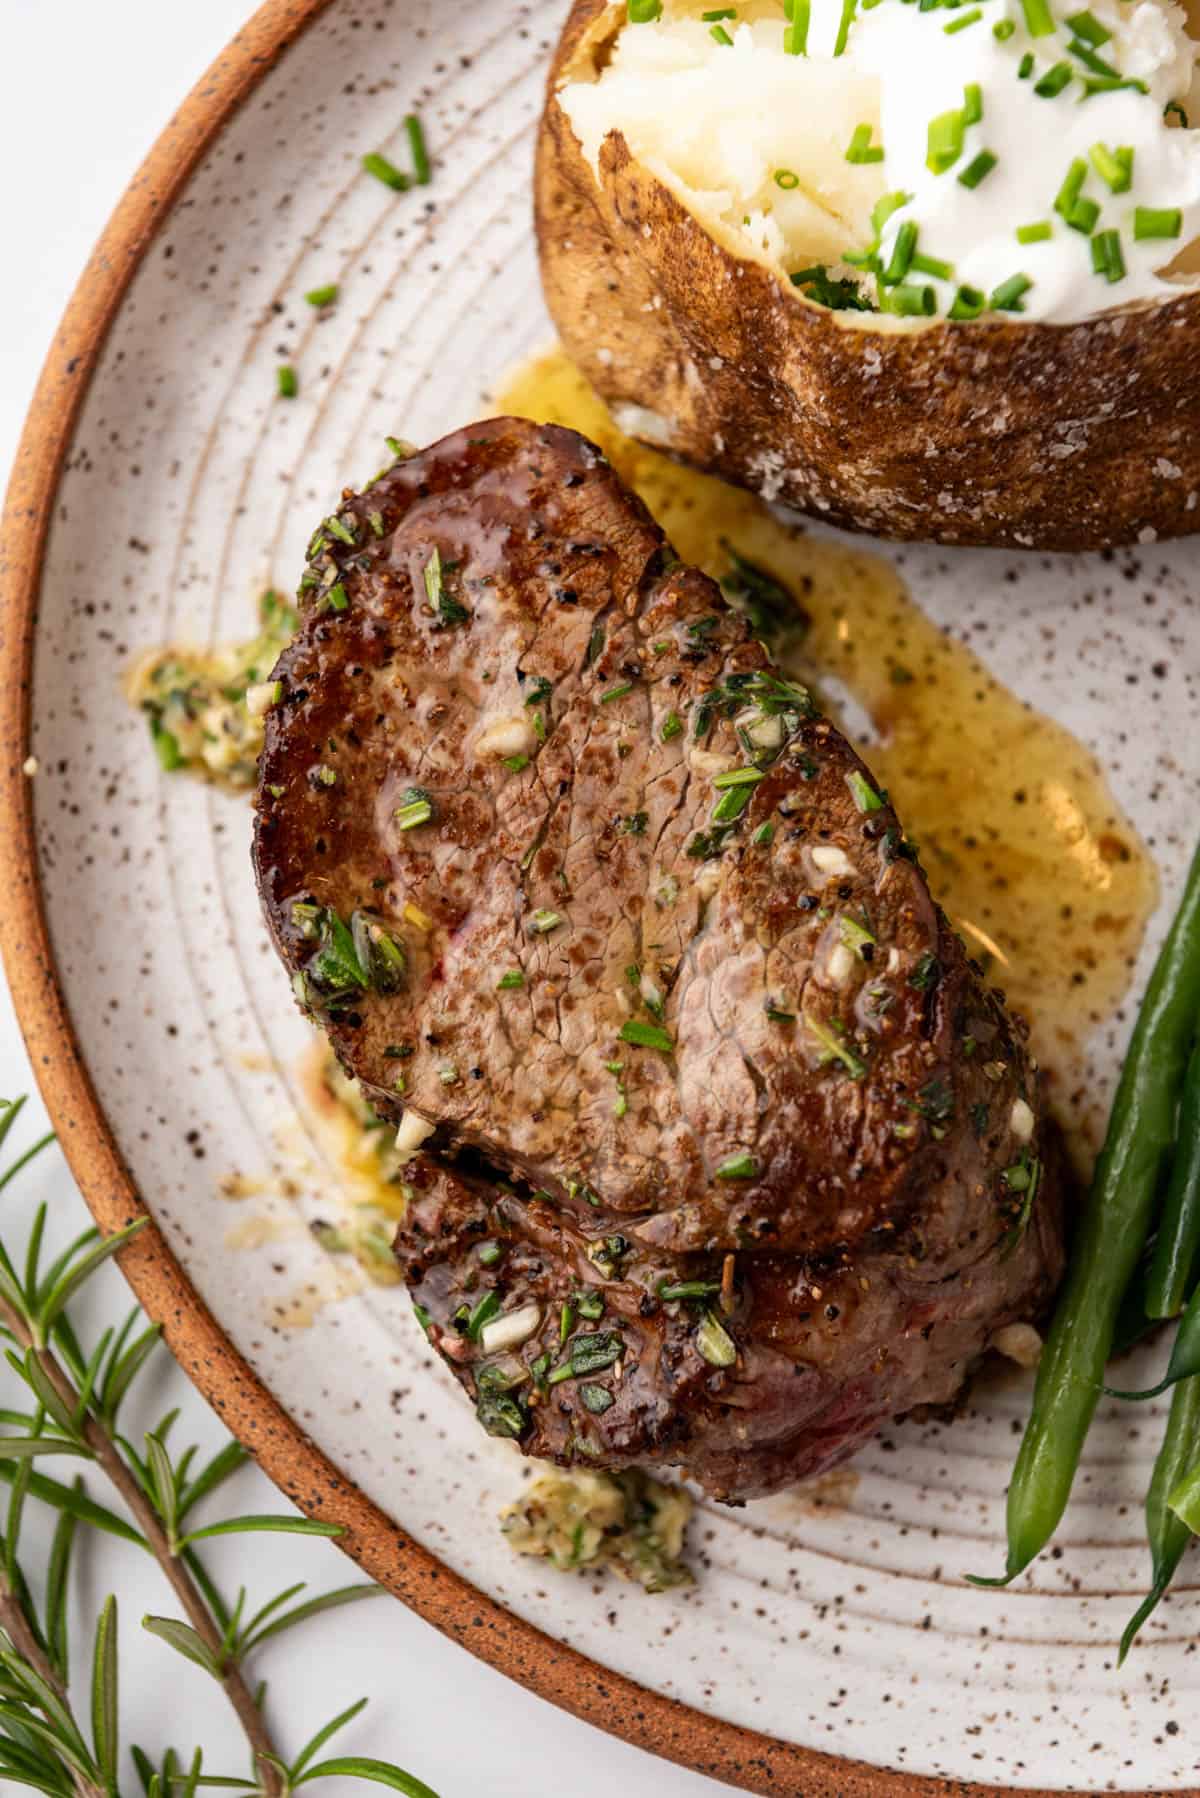 An overhead image of juicy filet mignon on a plate.